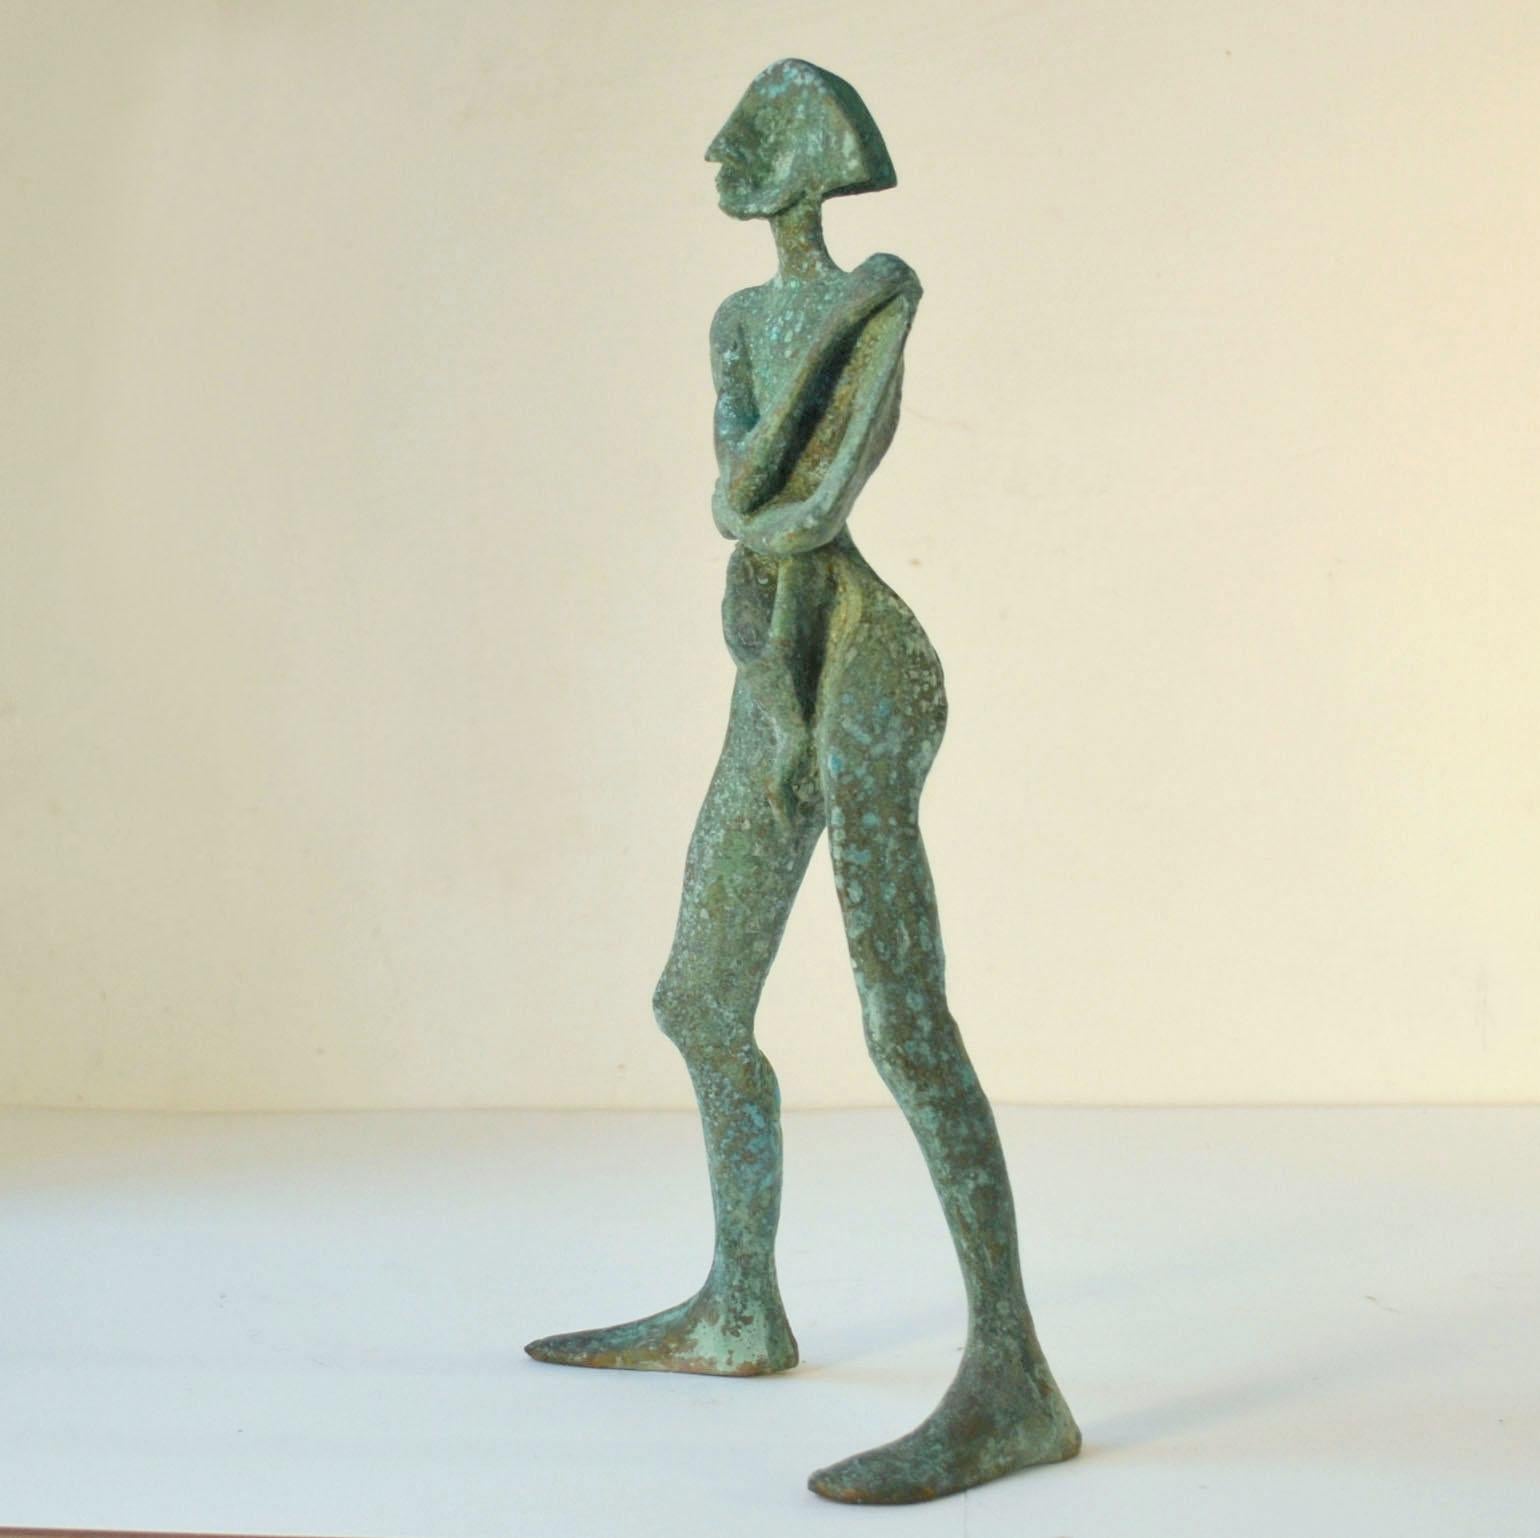 Standing man is an abstract sculpture in bronze titled 'Compass' with a green patina by the Dutch sculptor Lies Gronheid, 1982. His profile is divided into in four directions like a compass with his legs position apart and arms crossed. 
We use a